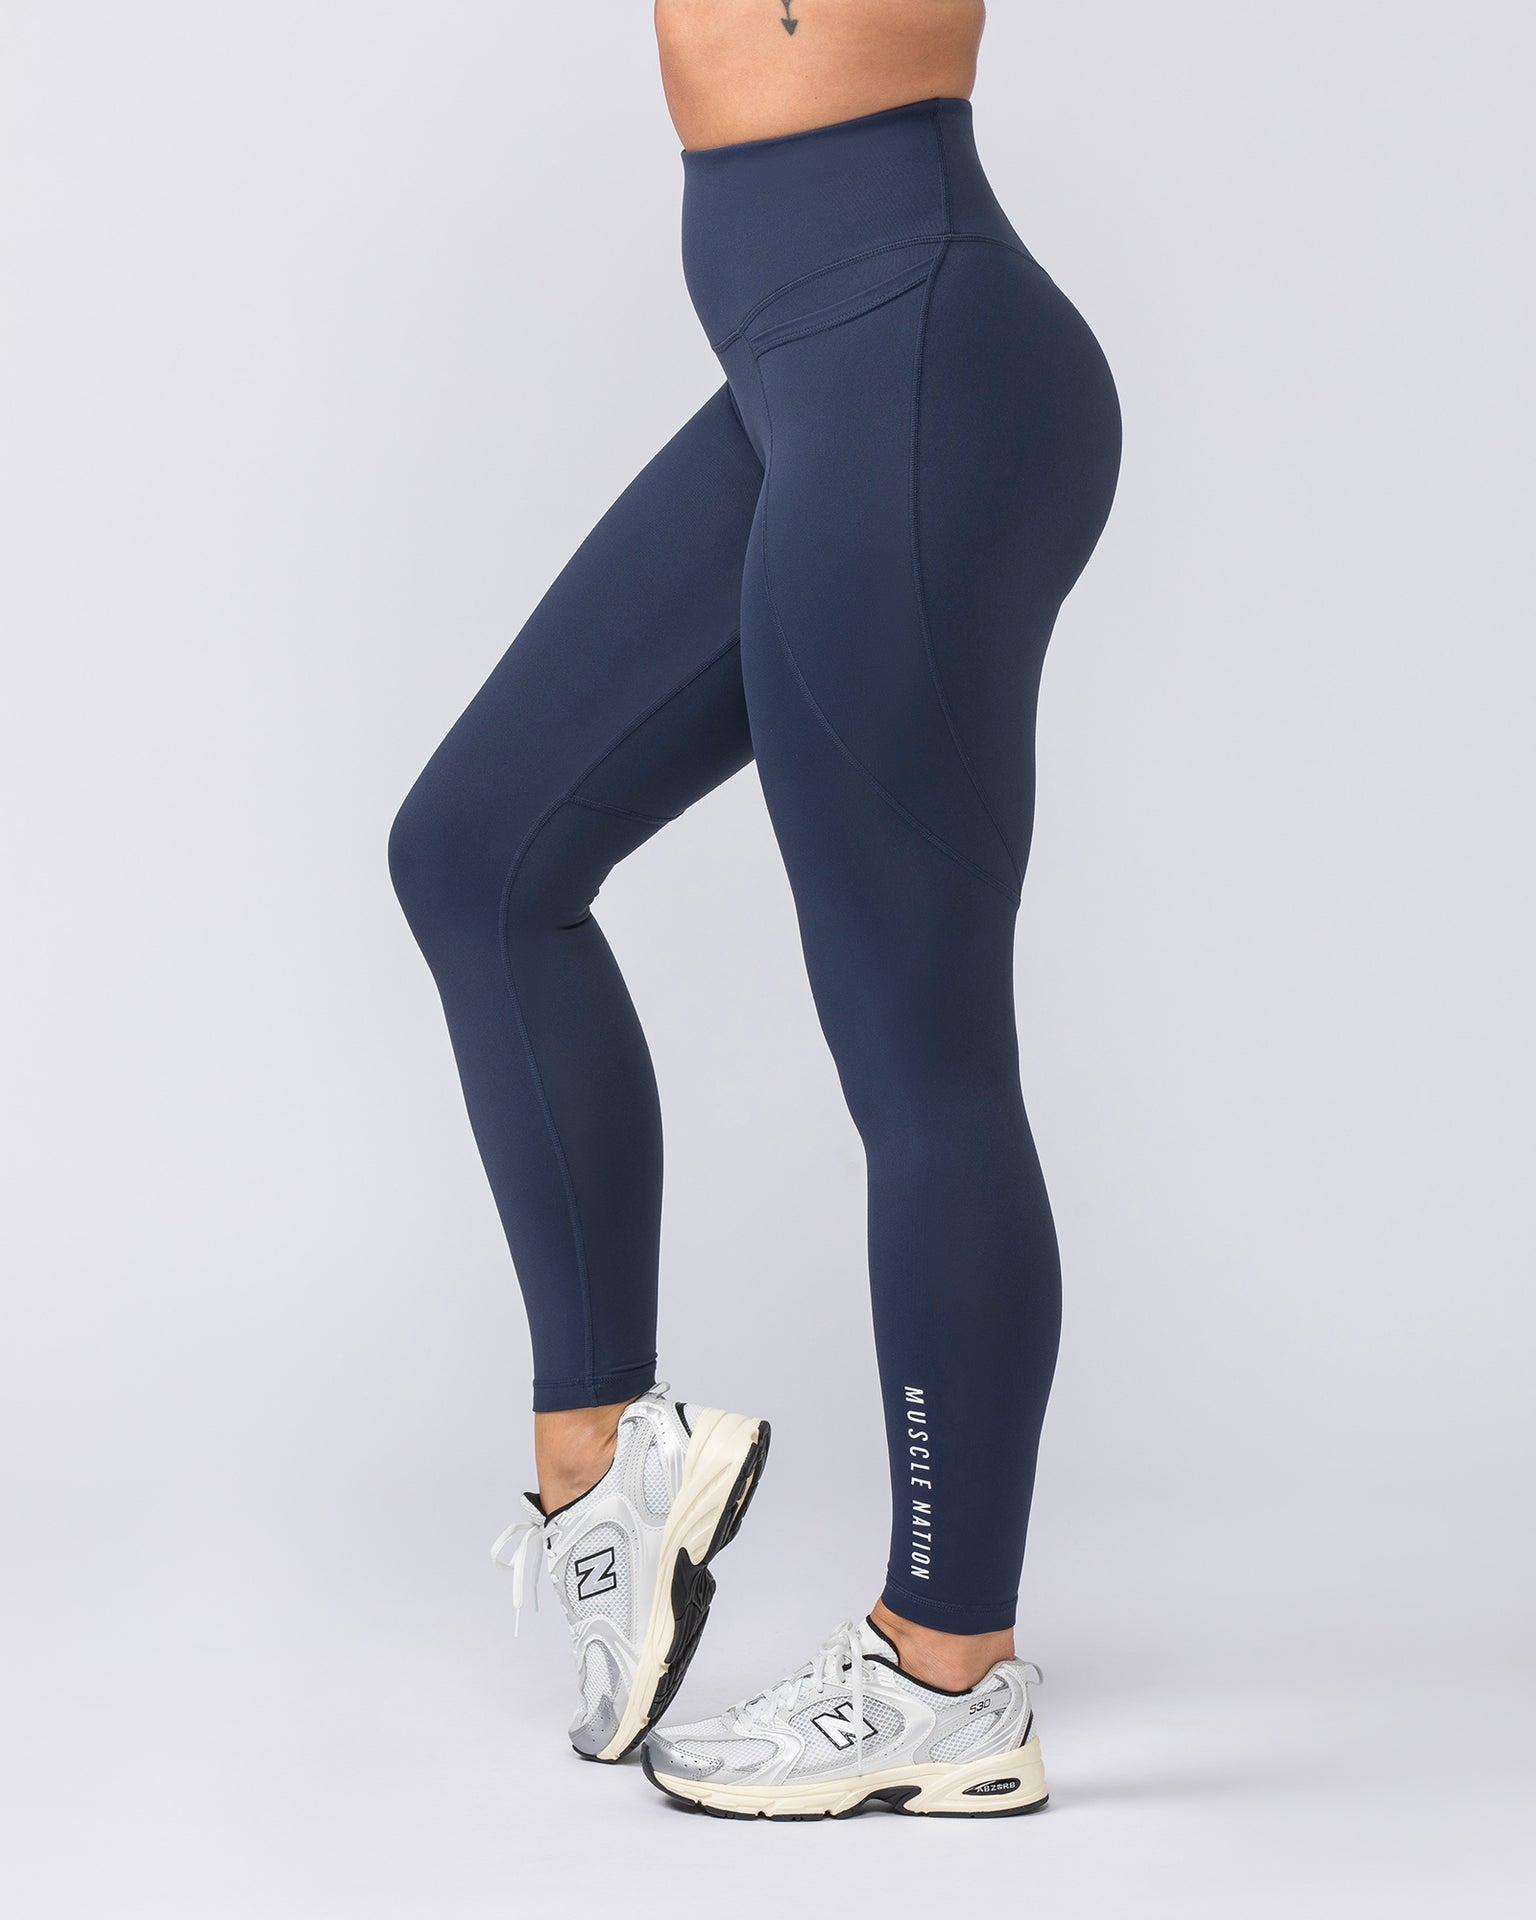 Muscle Nation Leggings Signature Boost Ankle Length Leggings - Spellbound